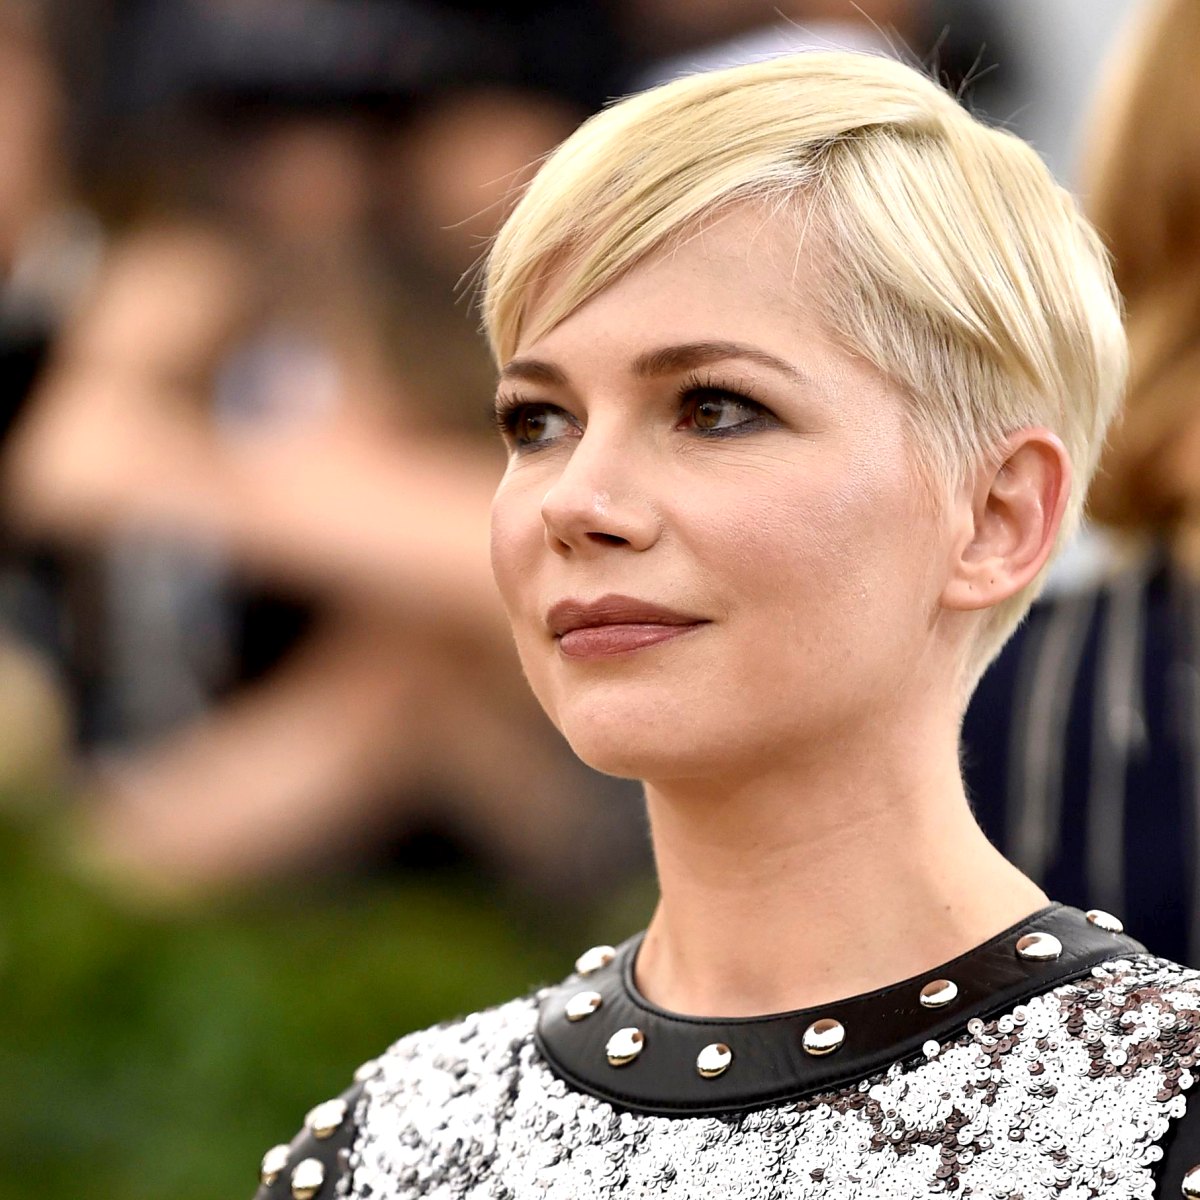 Michelle Williams's worst hair at the 2016 MET Gala